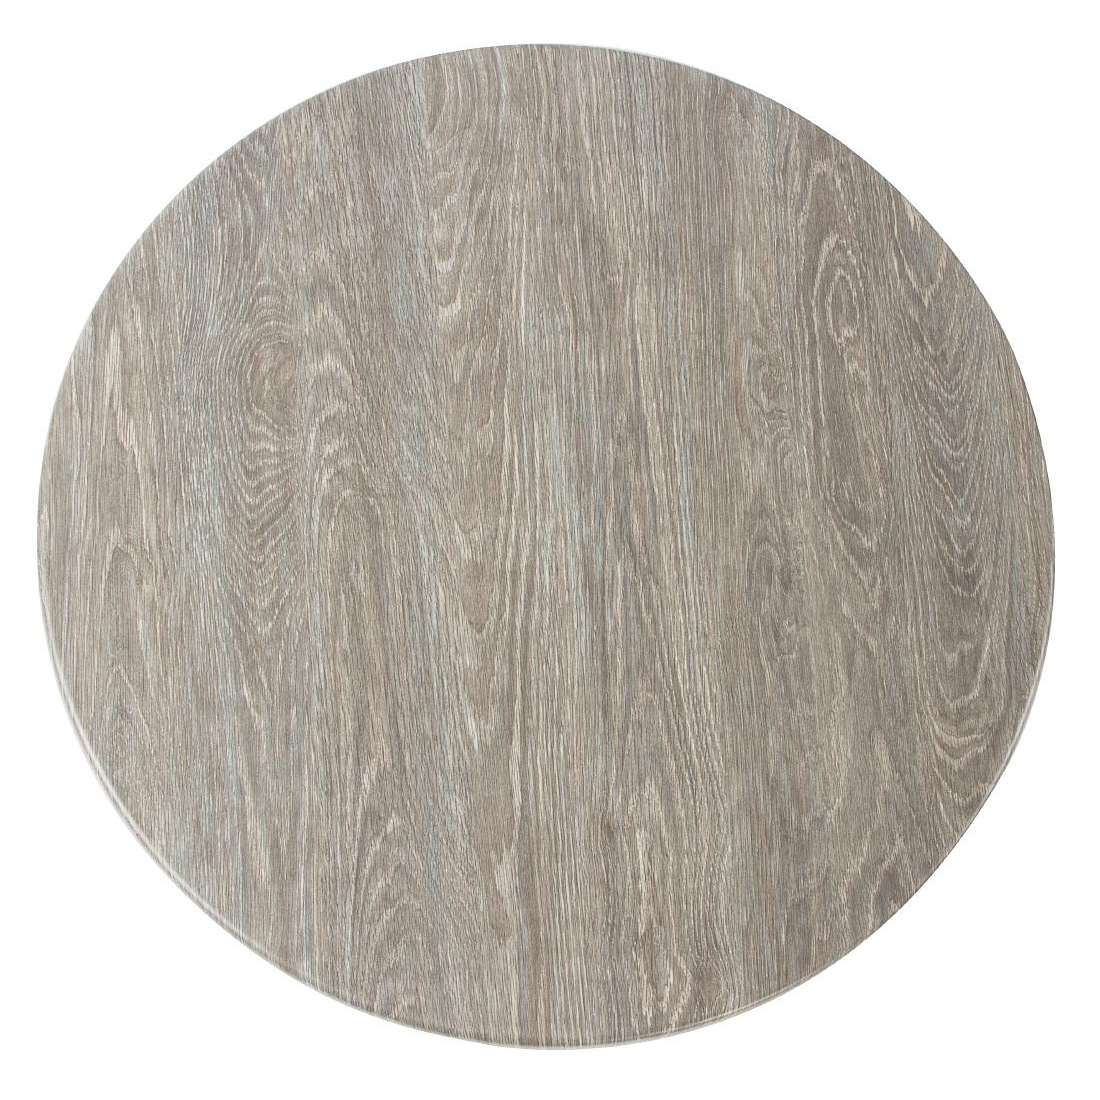 Werzalit Pre-drilled Round Table Top  Limed Oak 600mm